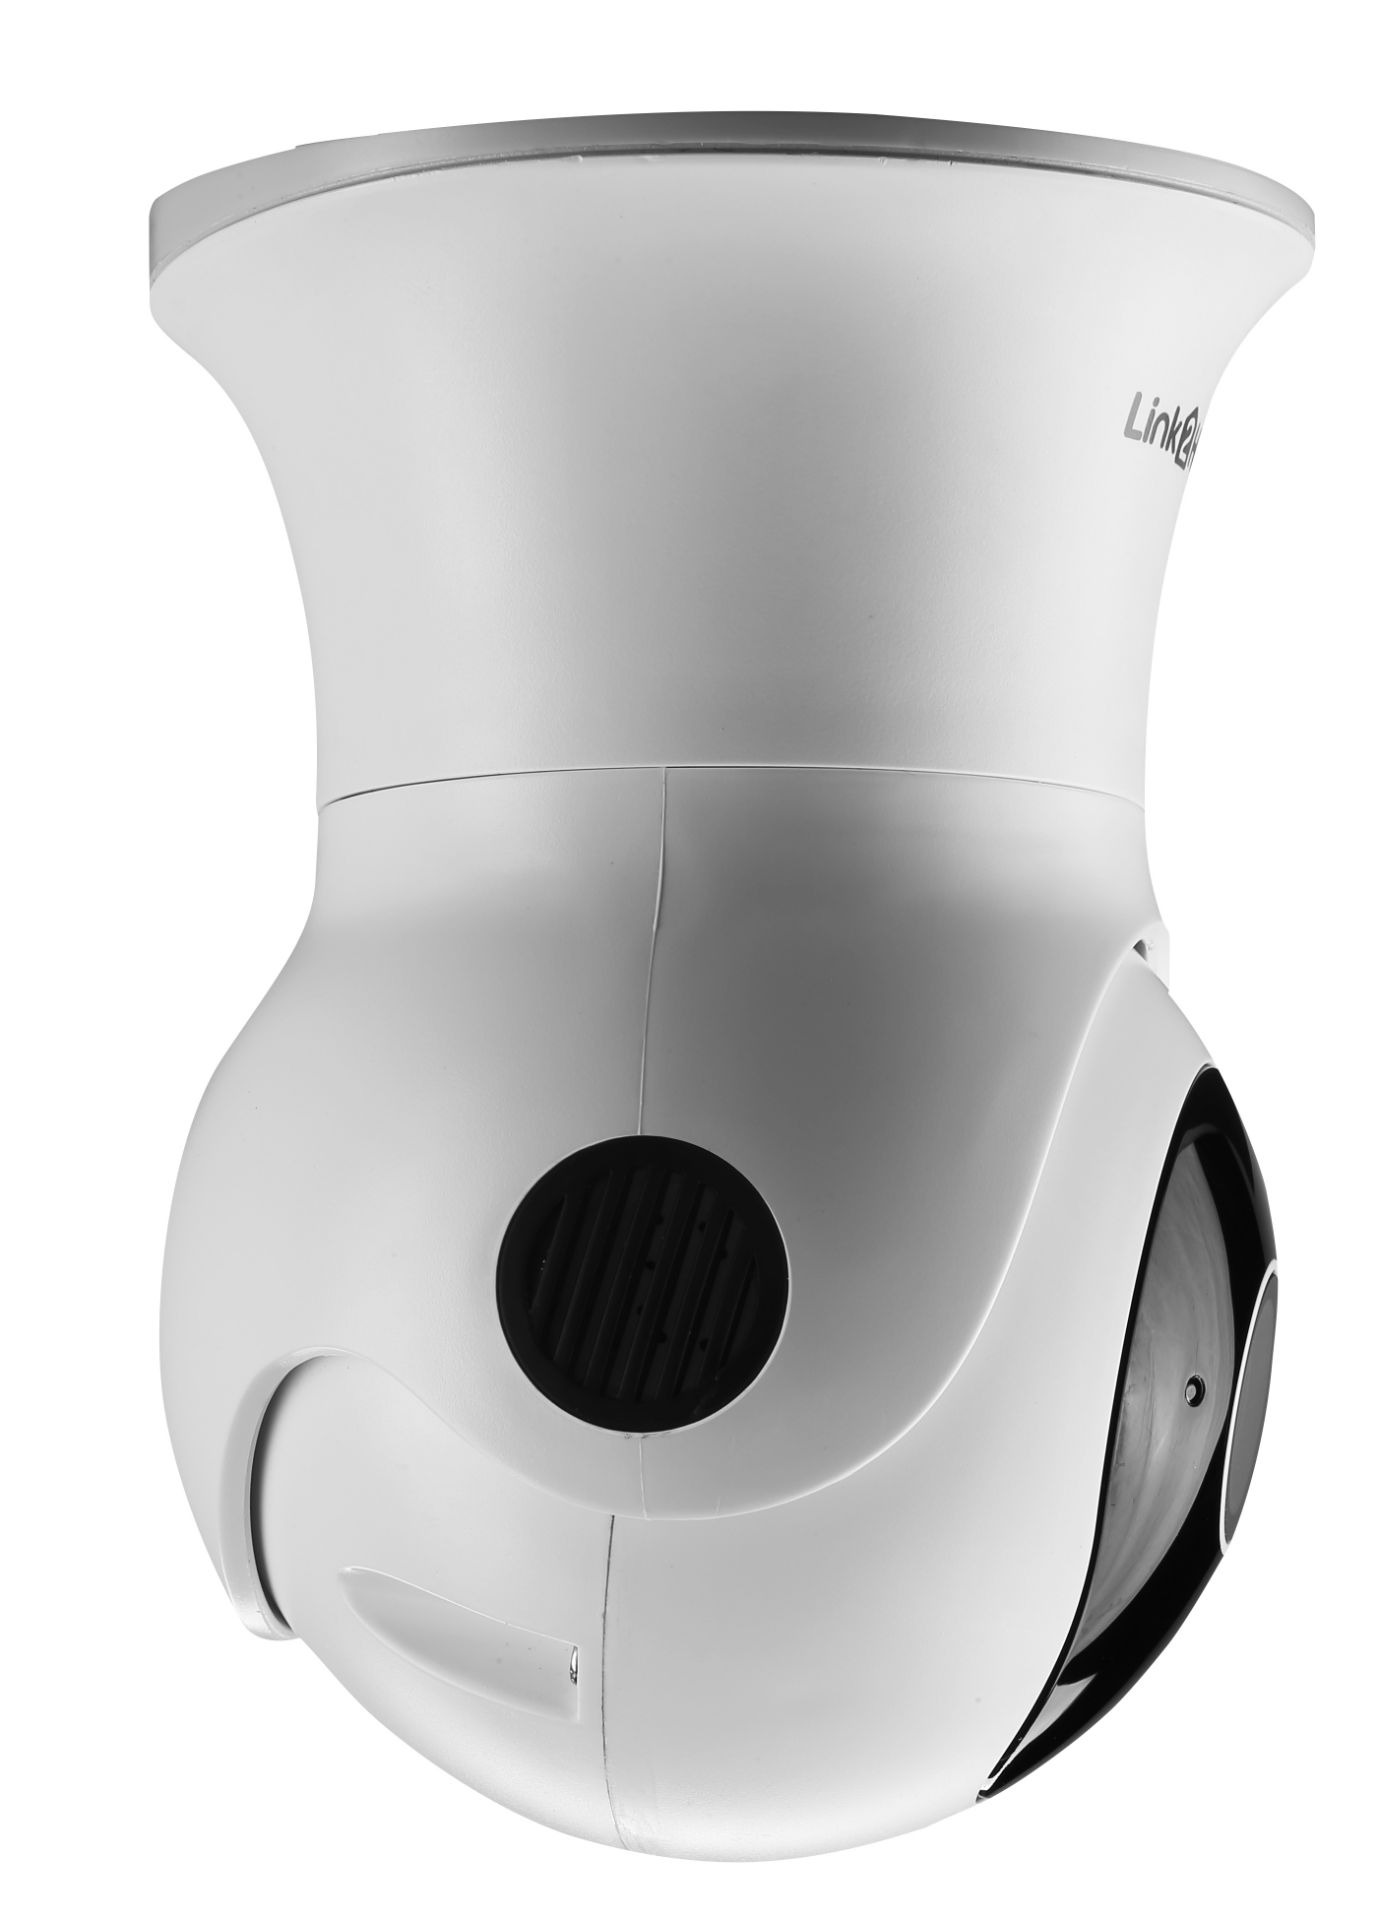 A Link2Home 'L2H-ODRCameraP/T' External Weatherproof Wi-Fi Camera with Pan and Tilt Operation - New, - Image 5 of 14